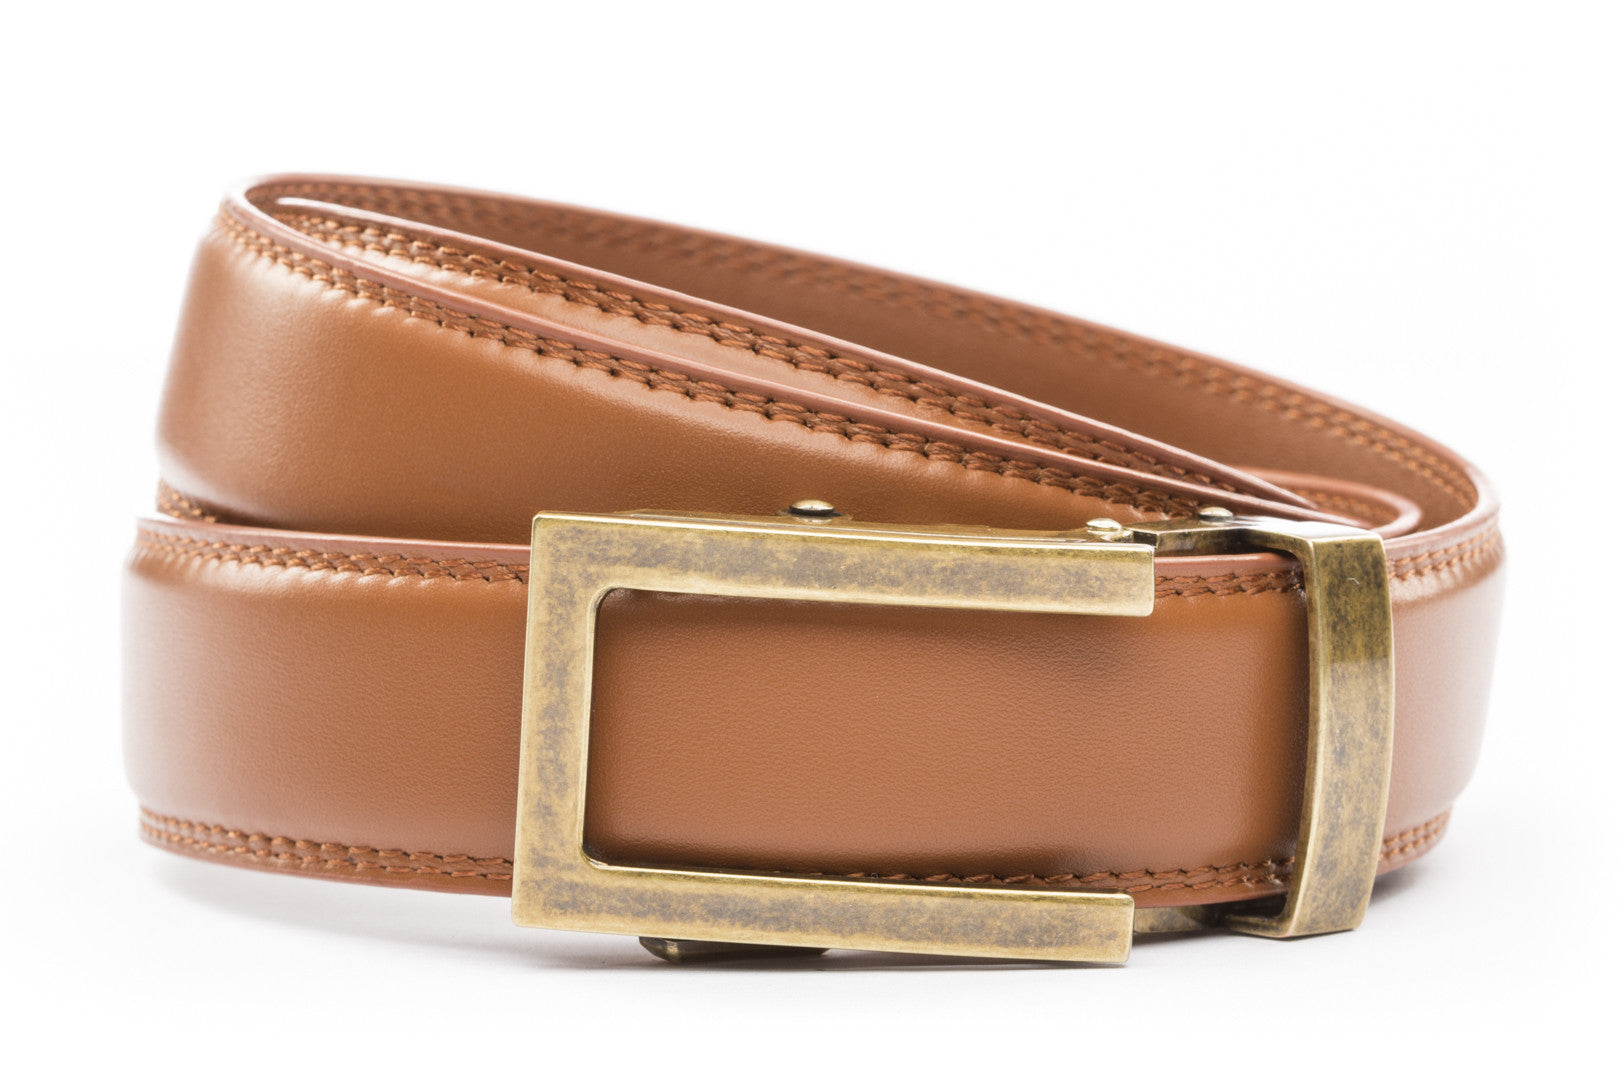 Belts Without Holes. Anson Belt & Buckle offers micro-adjustable holeless  belts for men!